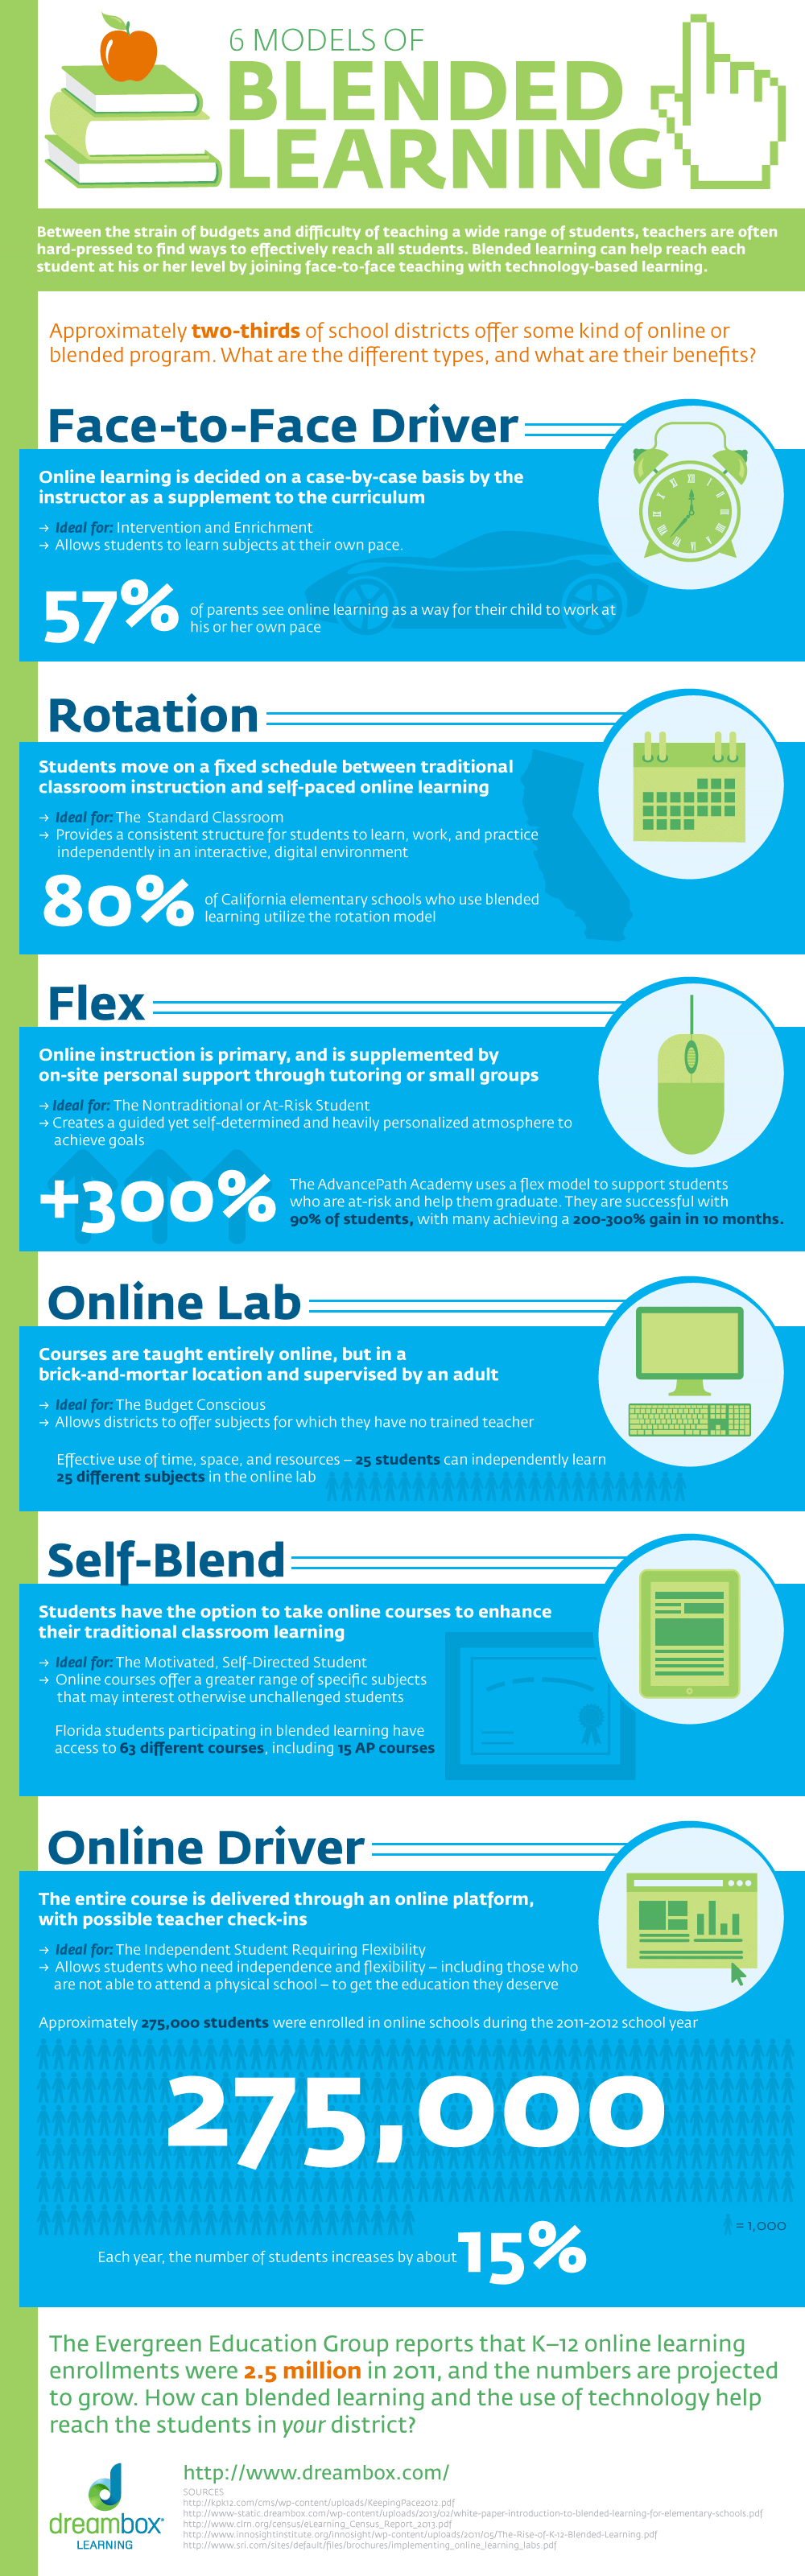 blended-learning-infographic